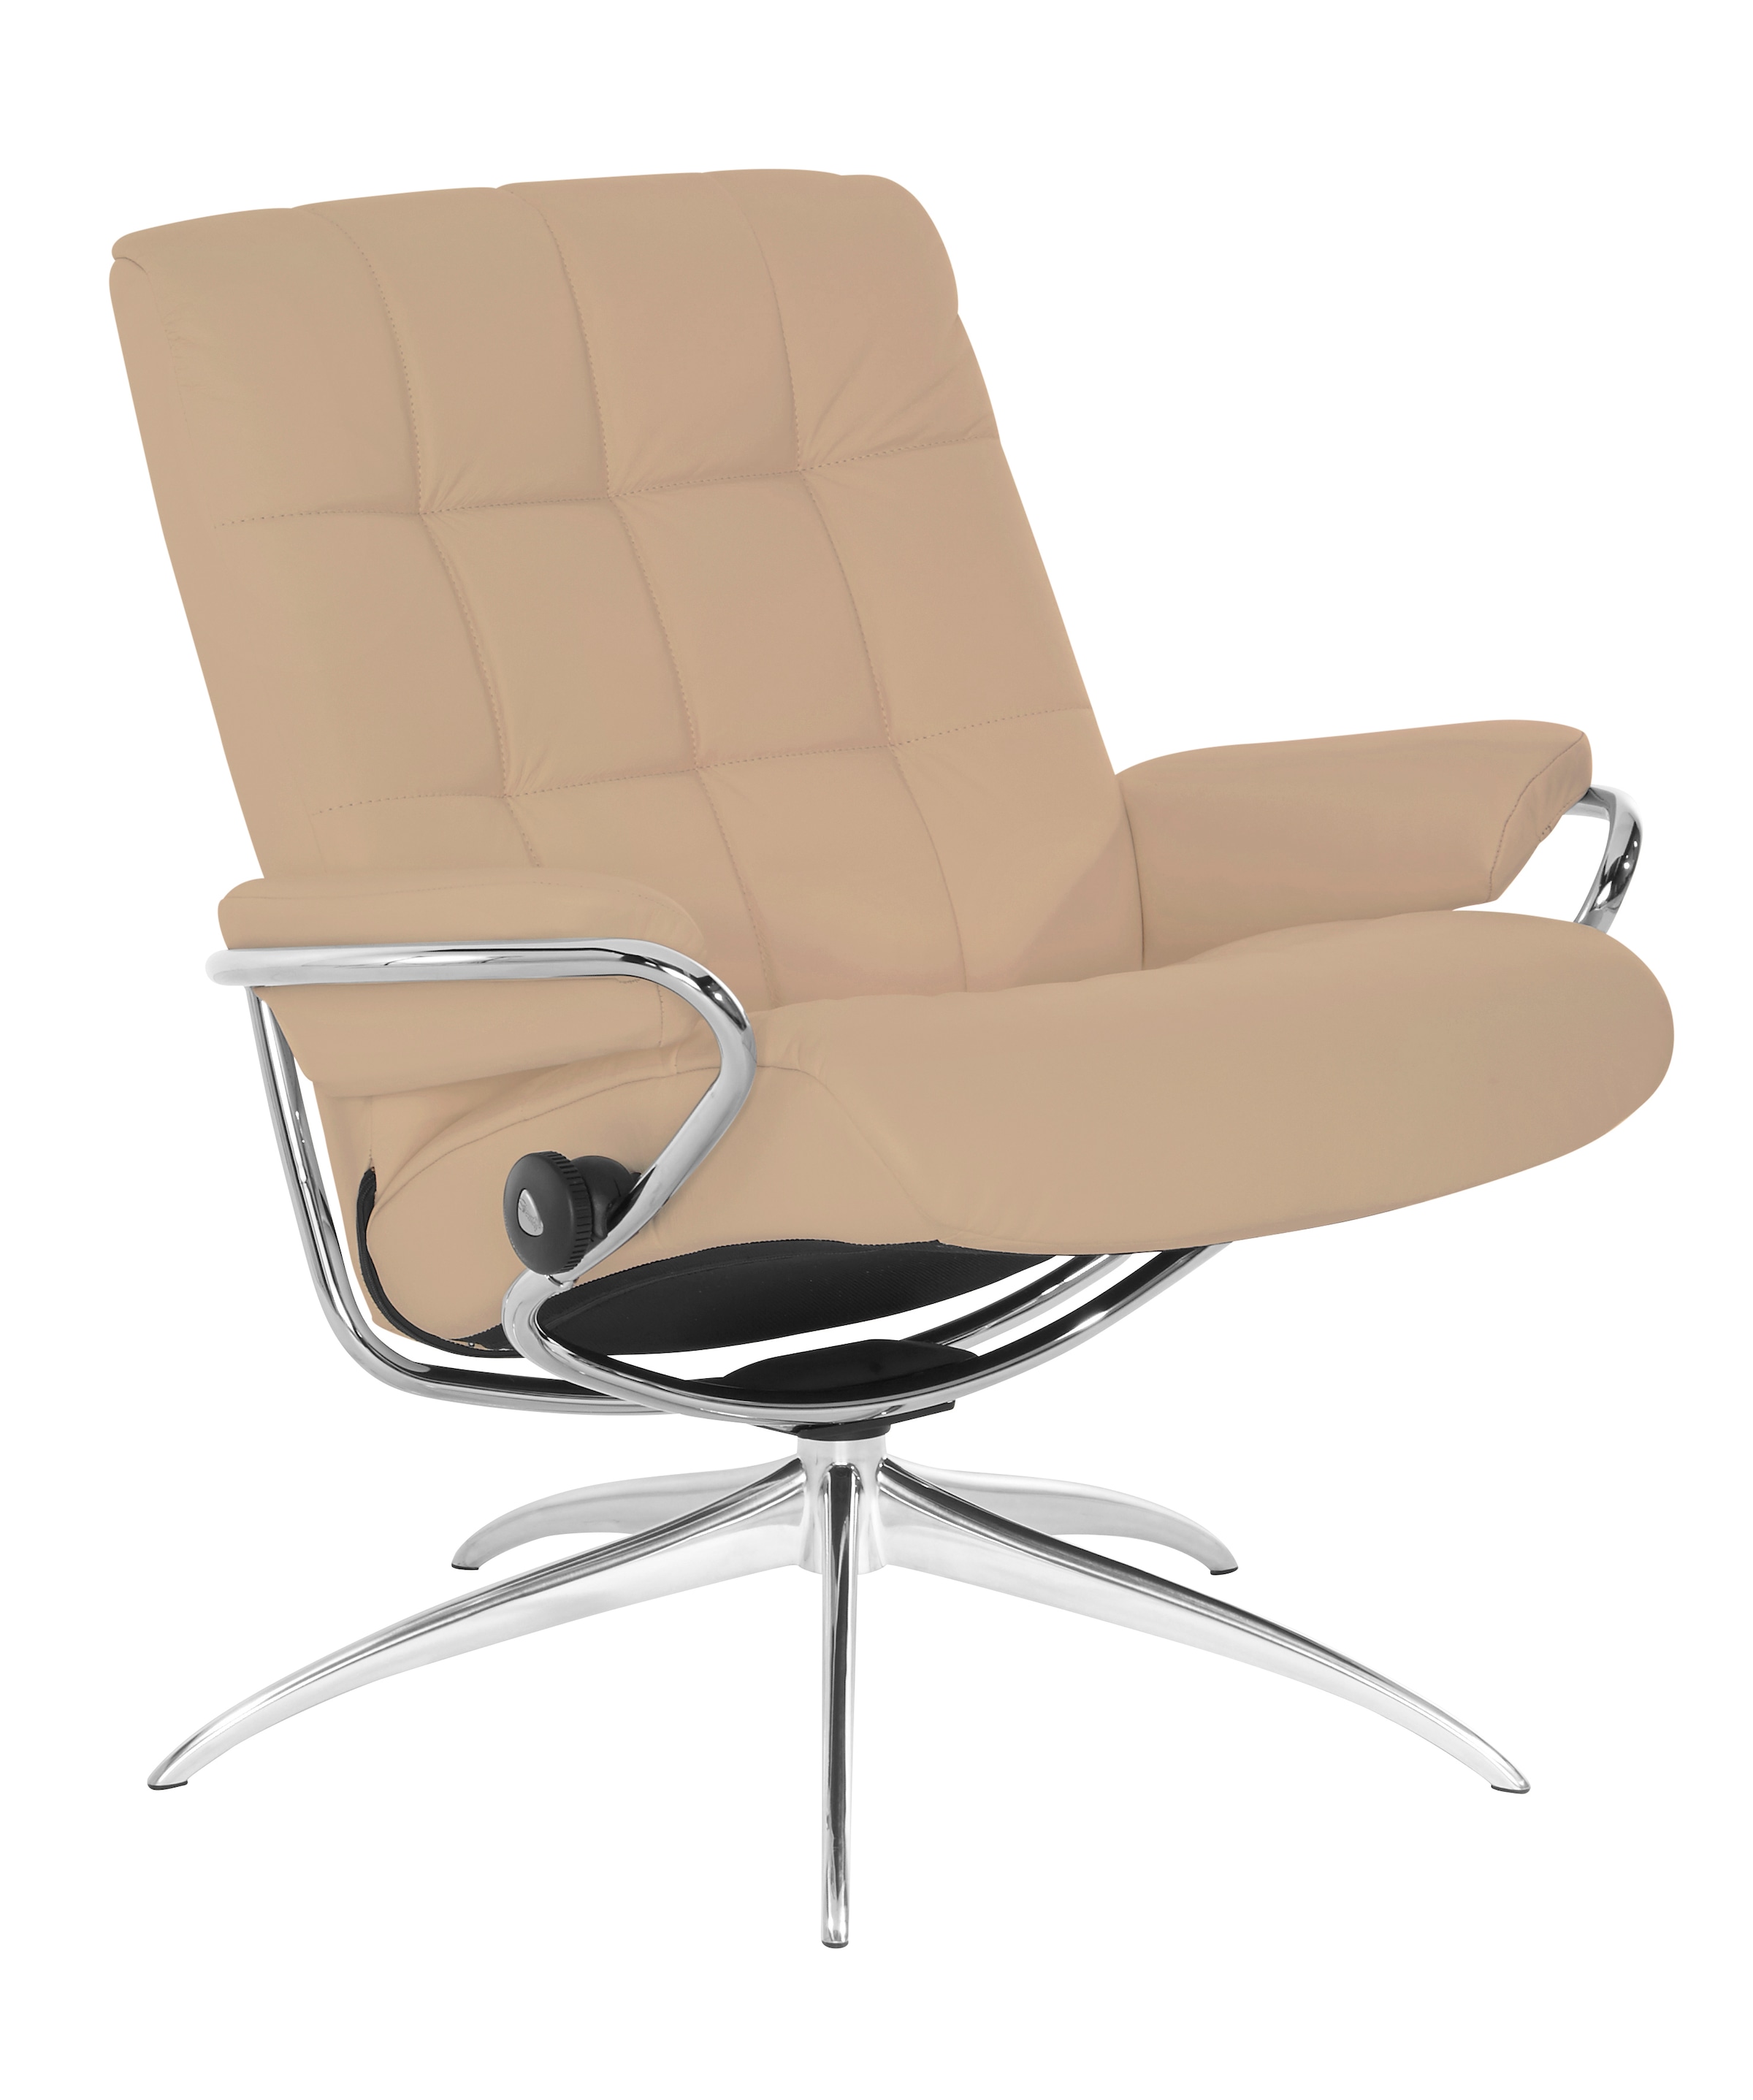 Low Relaxsessel Base, Stressless® kaufen OTTO Gestell bei Back, Star »London«, mit Chrom